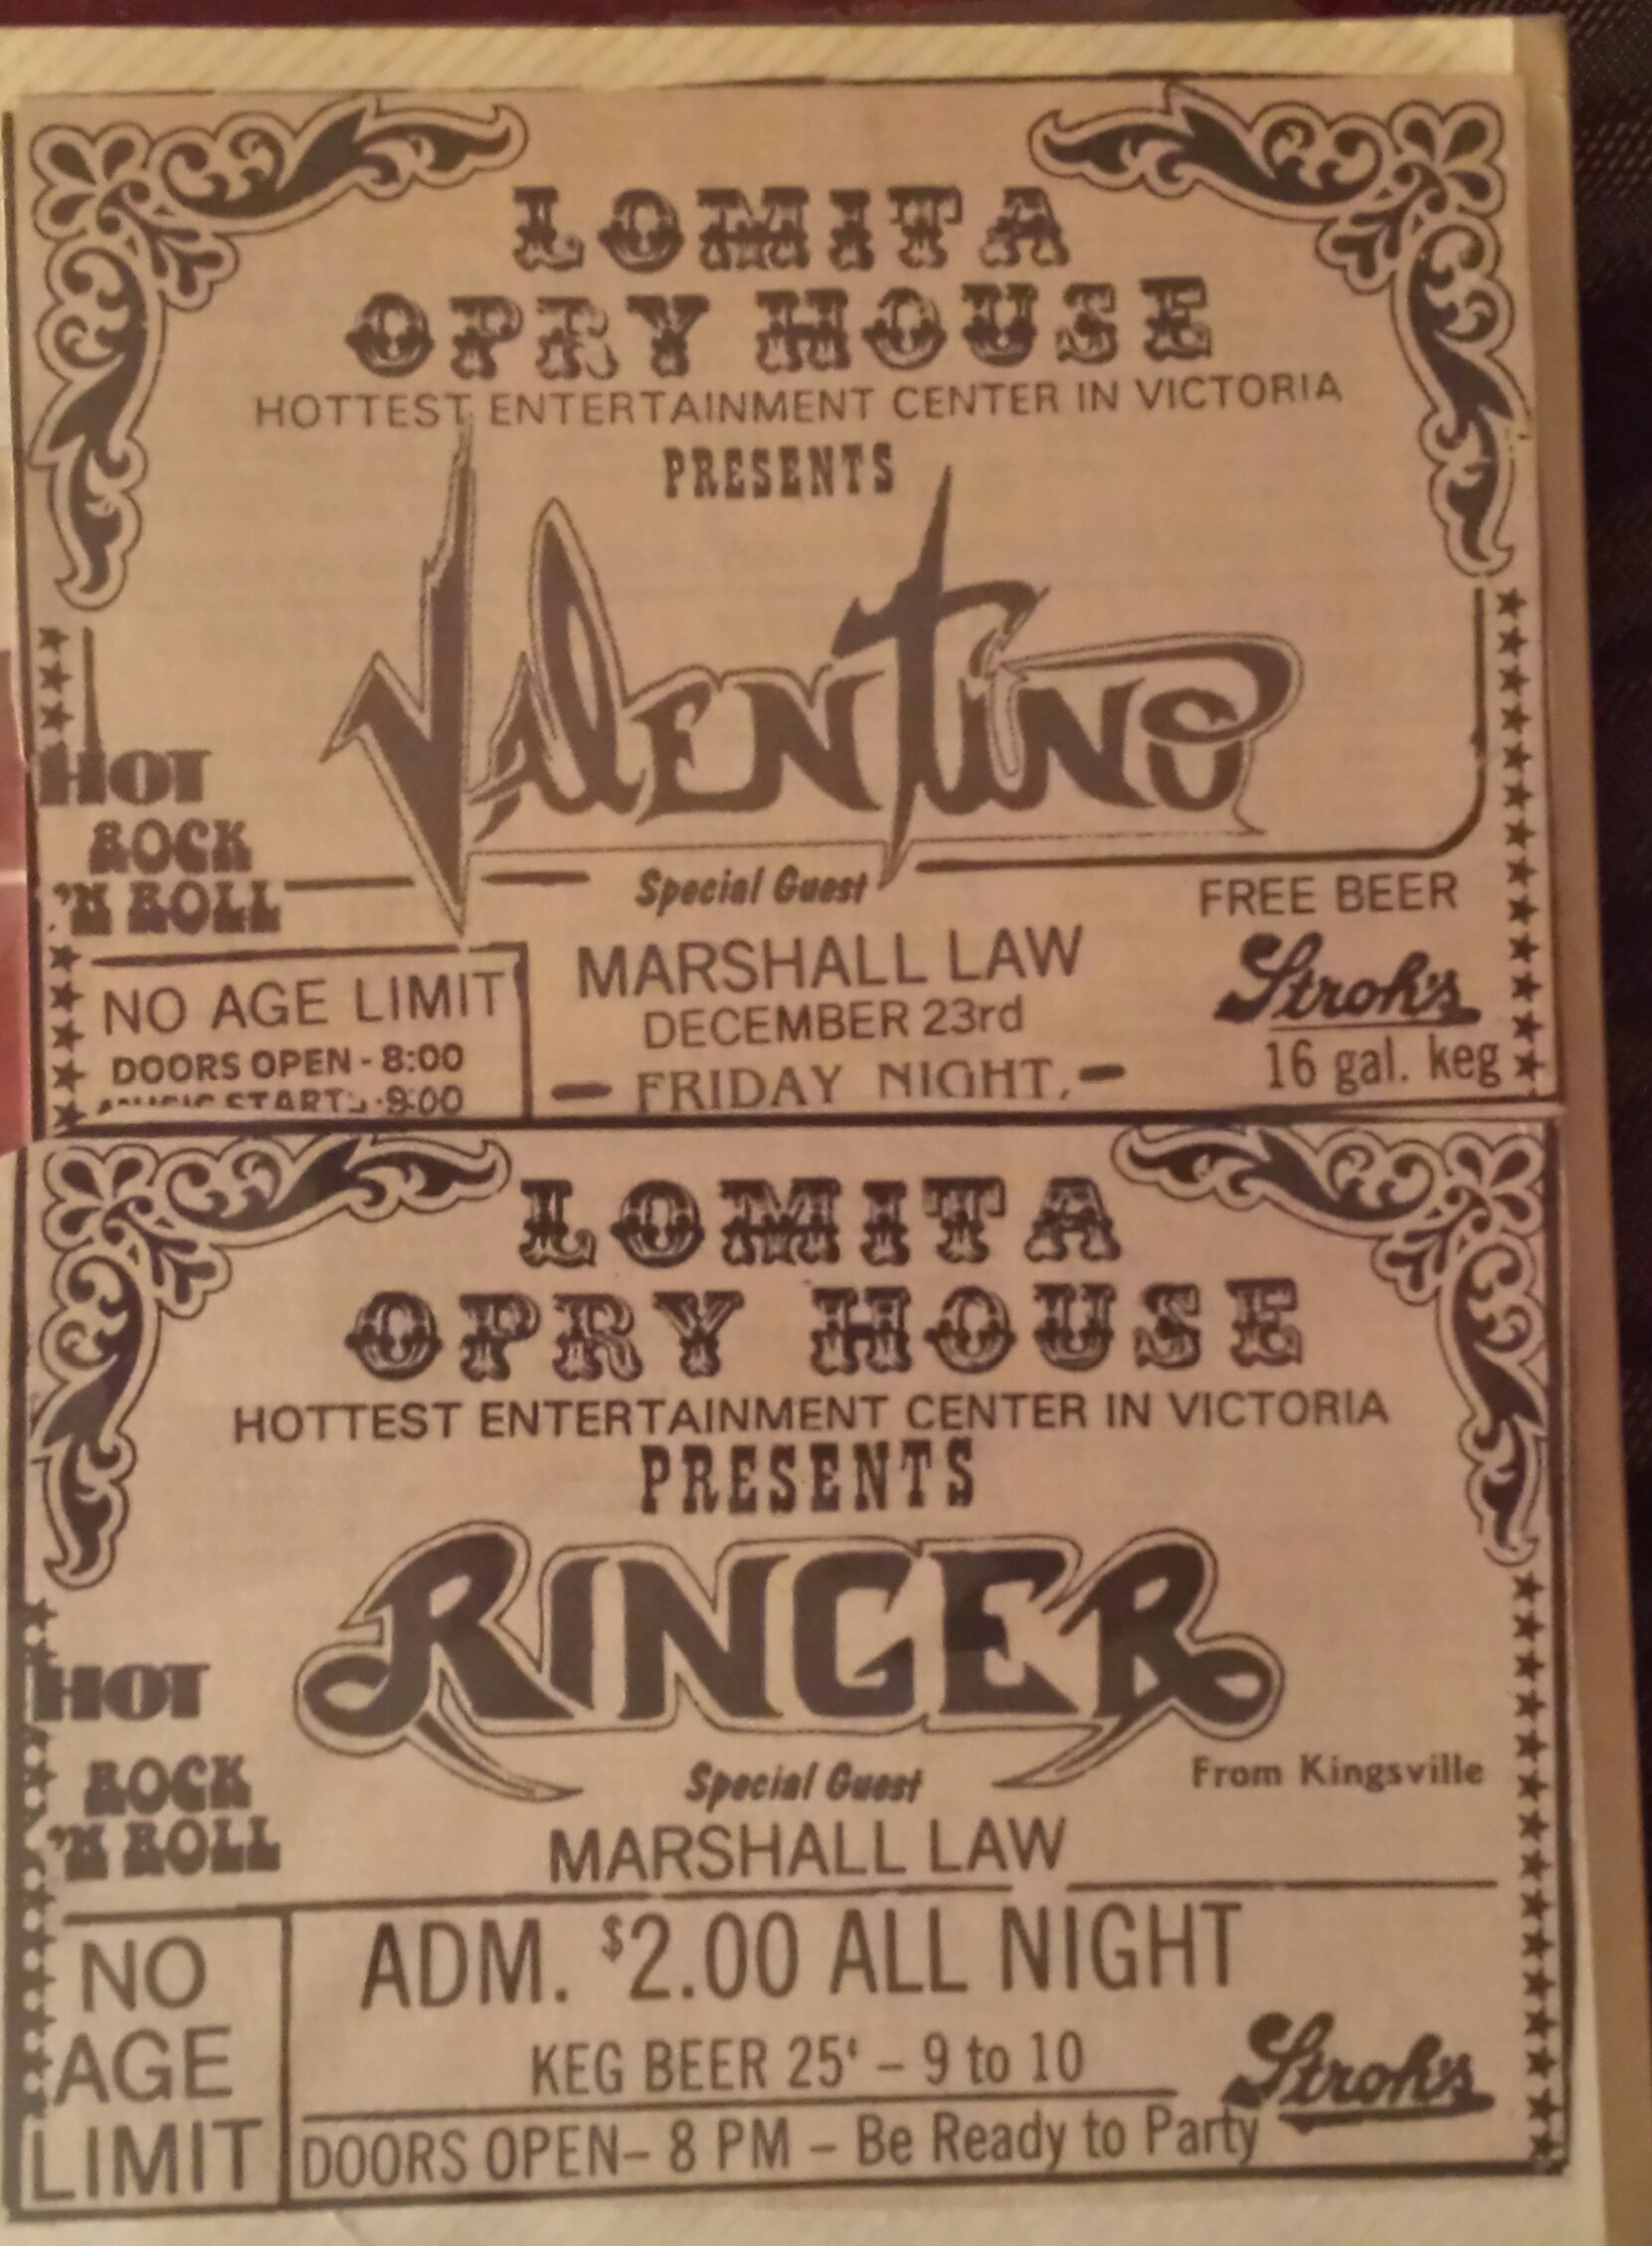 My Band Marshall Law Show ad's.